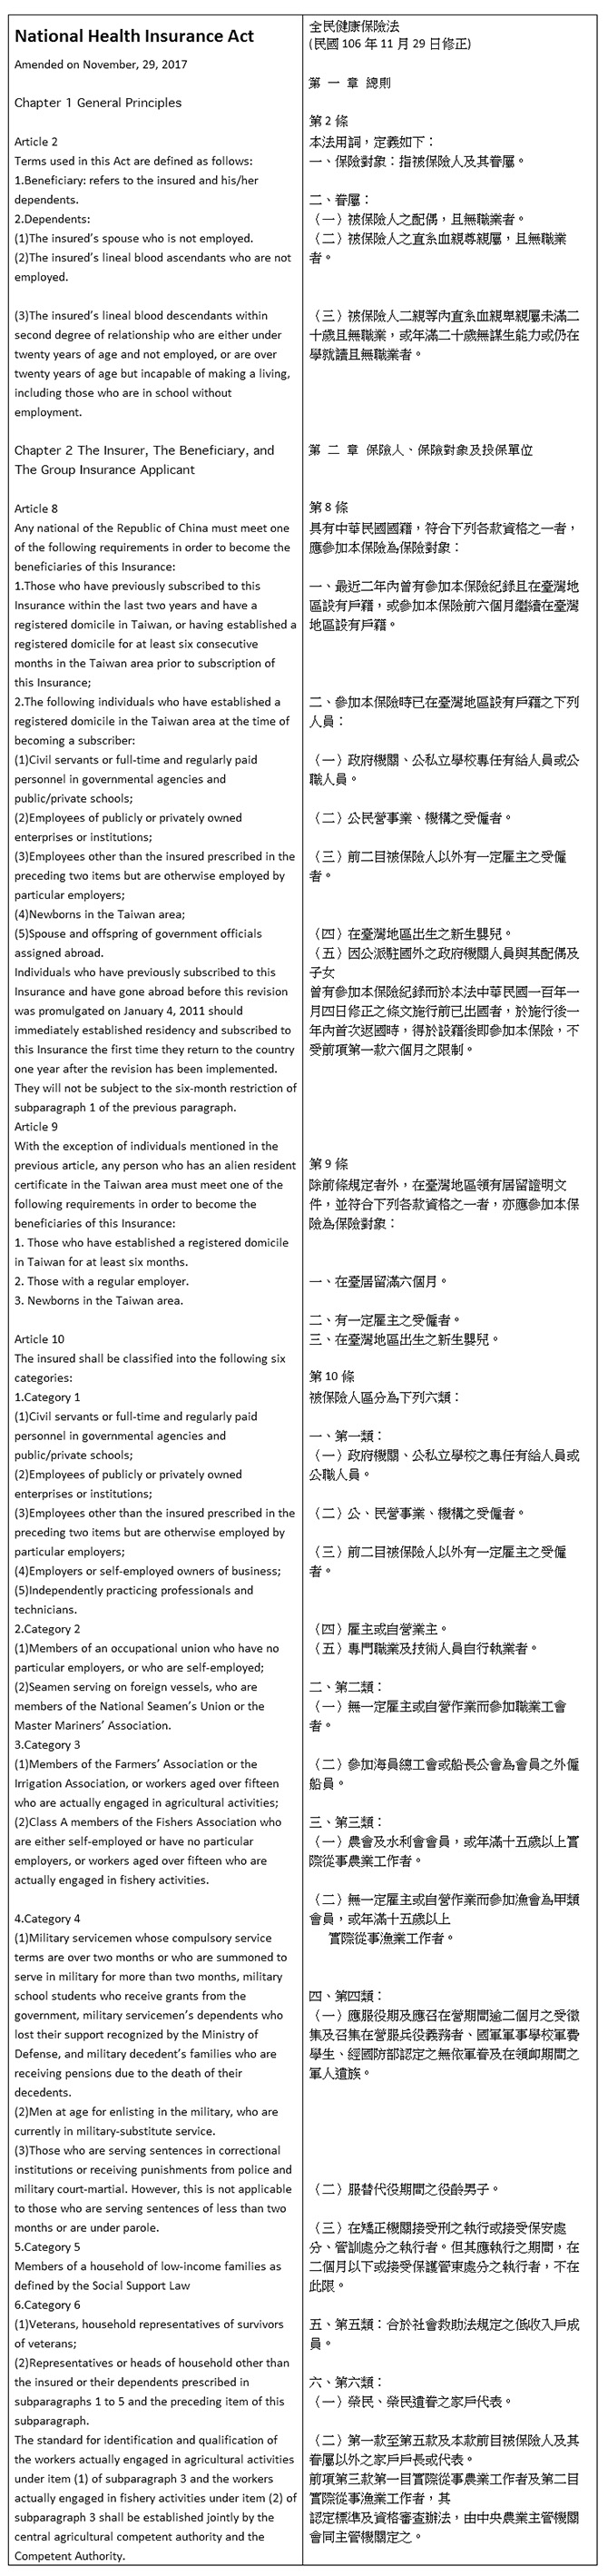 Taiwan NHI National Health Insurance Act Code Ch. 2 Article 8 in English and Chinese